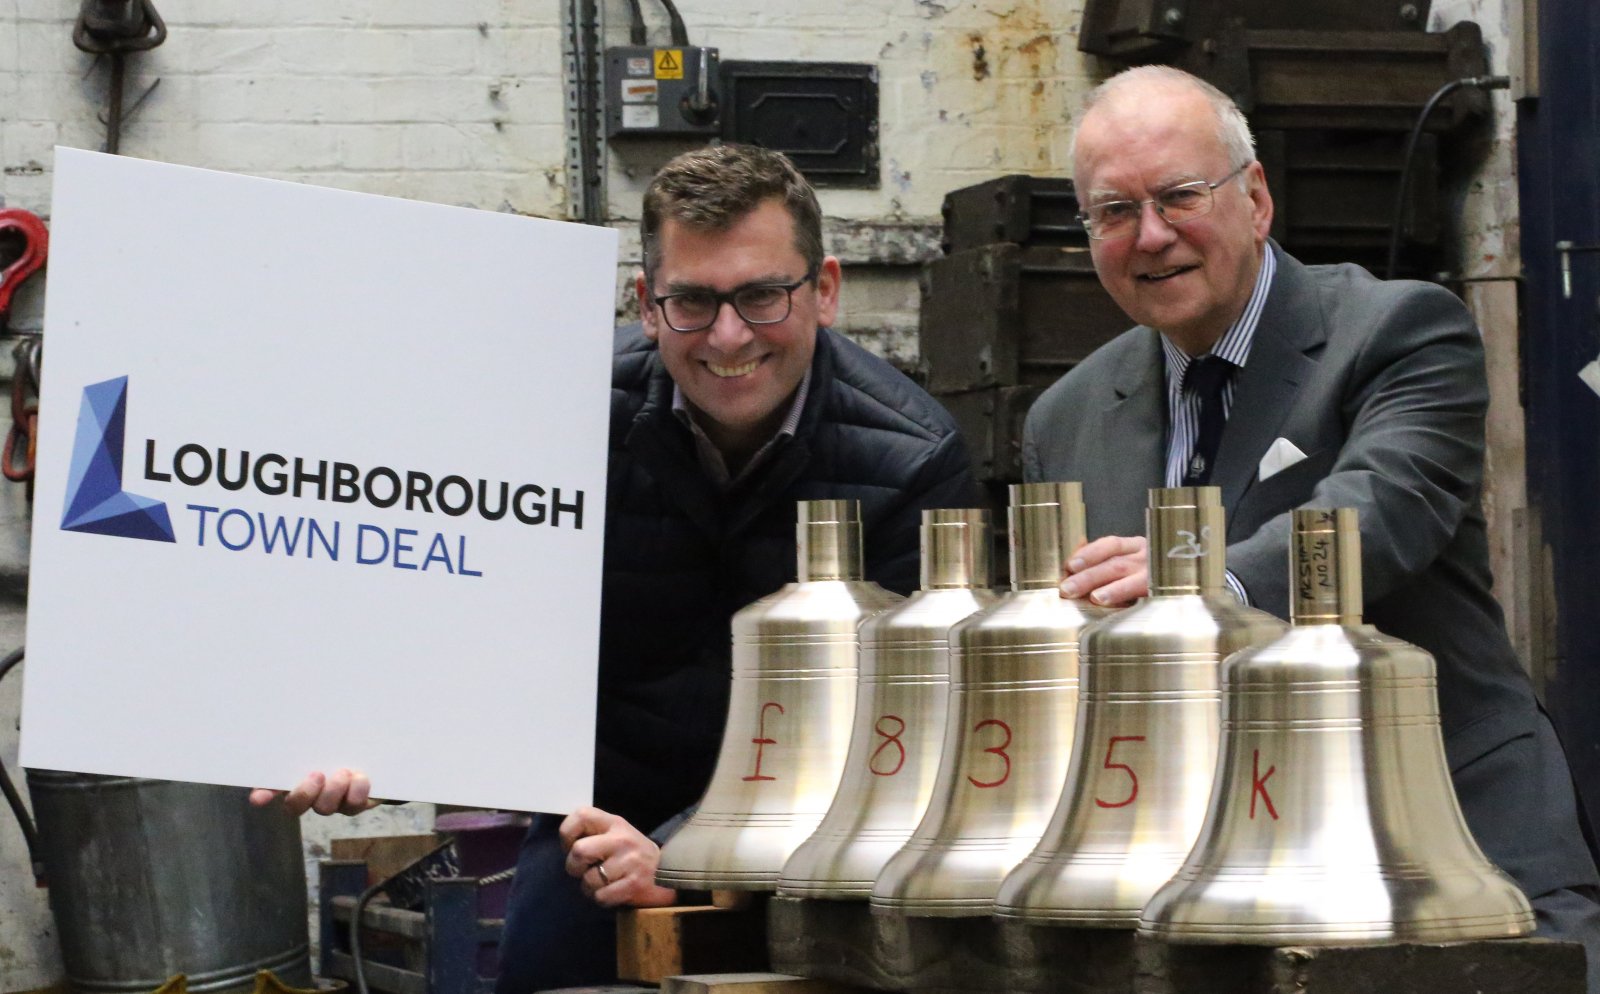 Loughborough Town Deal strikes again to support £5.4 million bell foundry project